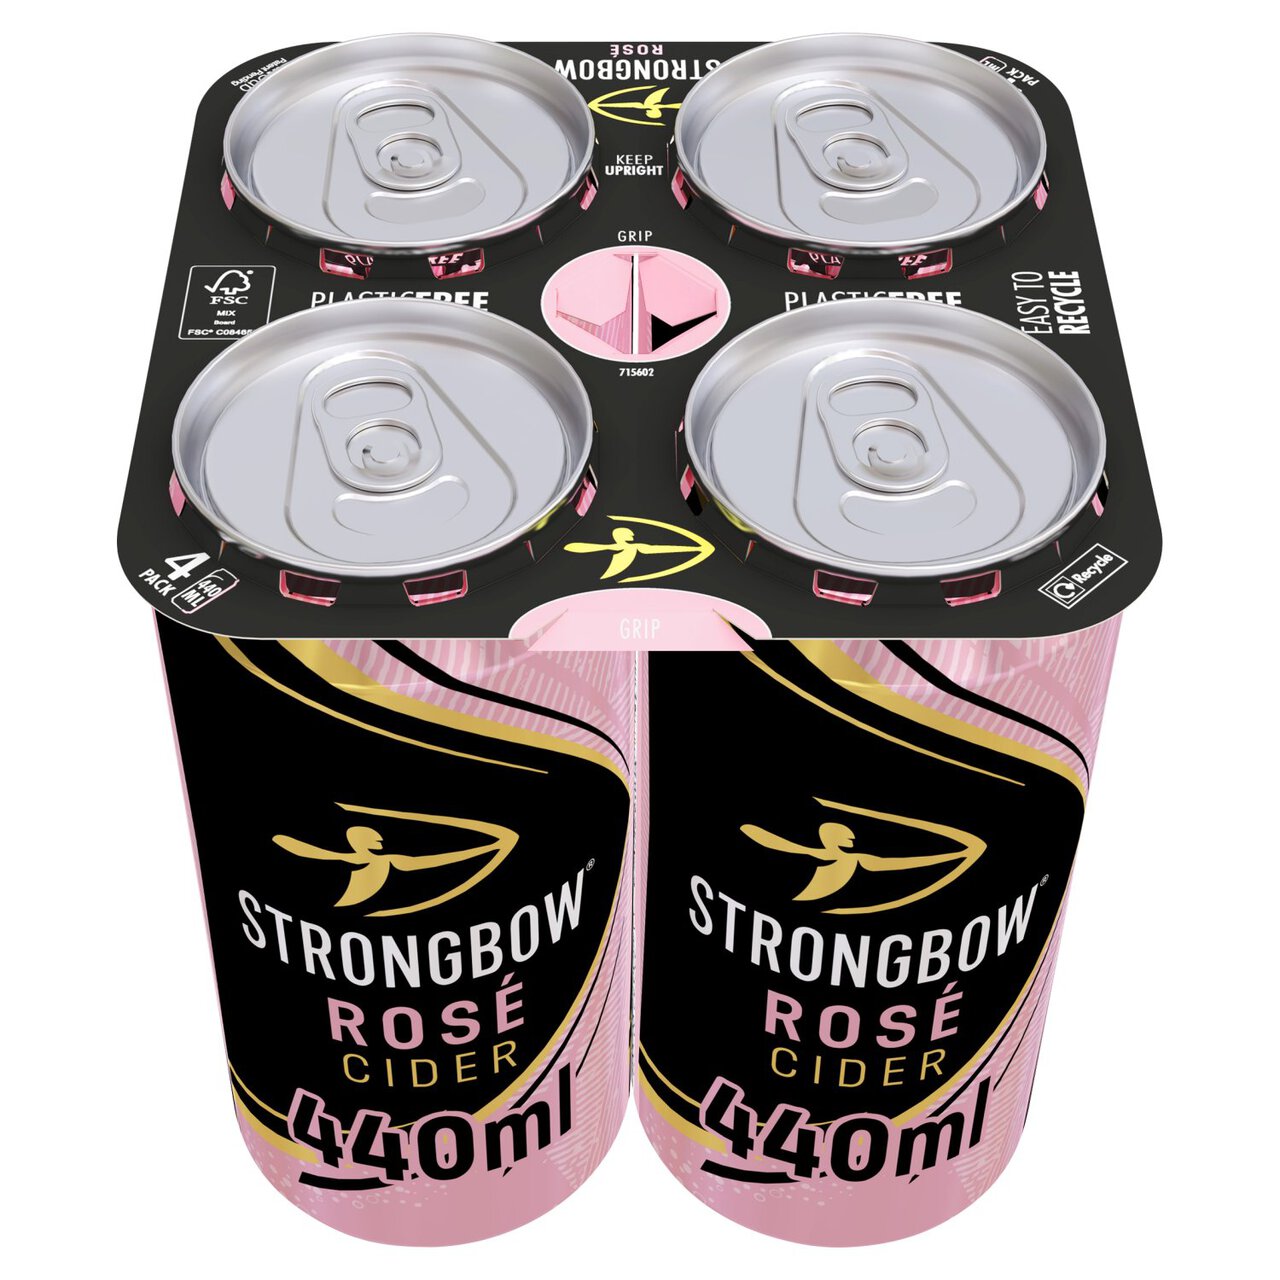 Strongbow Rose Cider 4 x 440ml